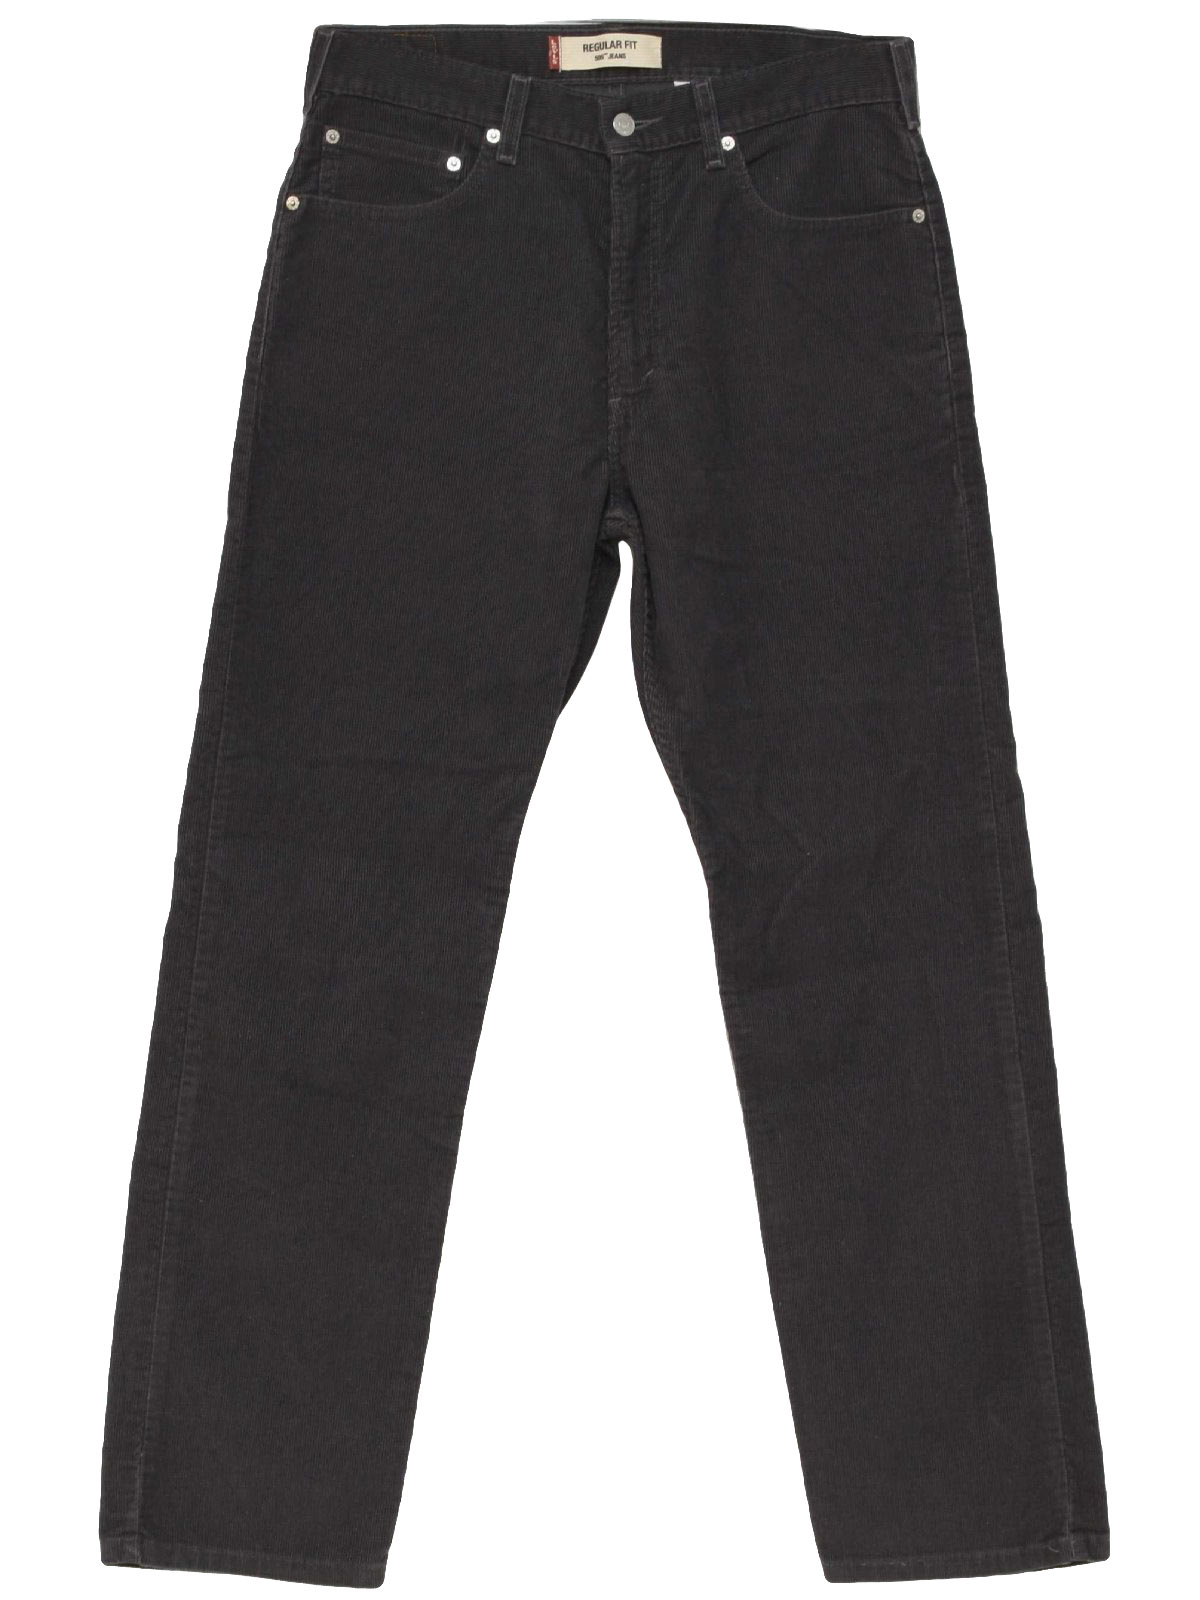 Nineties Vintage Pants: 90s -Levis 505- Mens grey cotton polyester ...